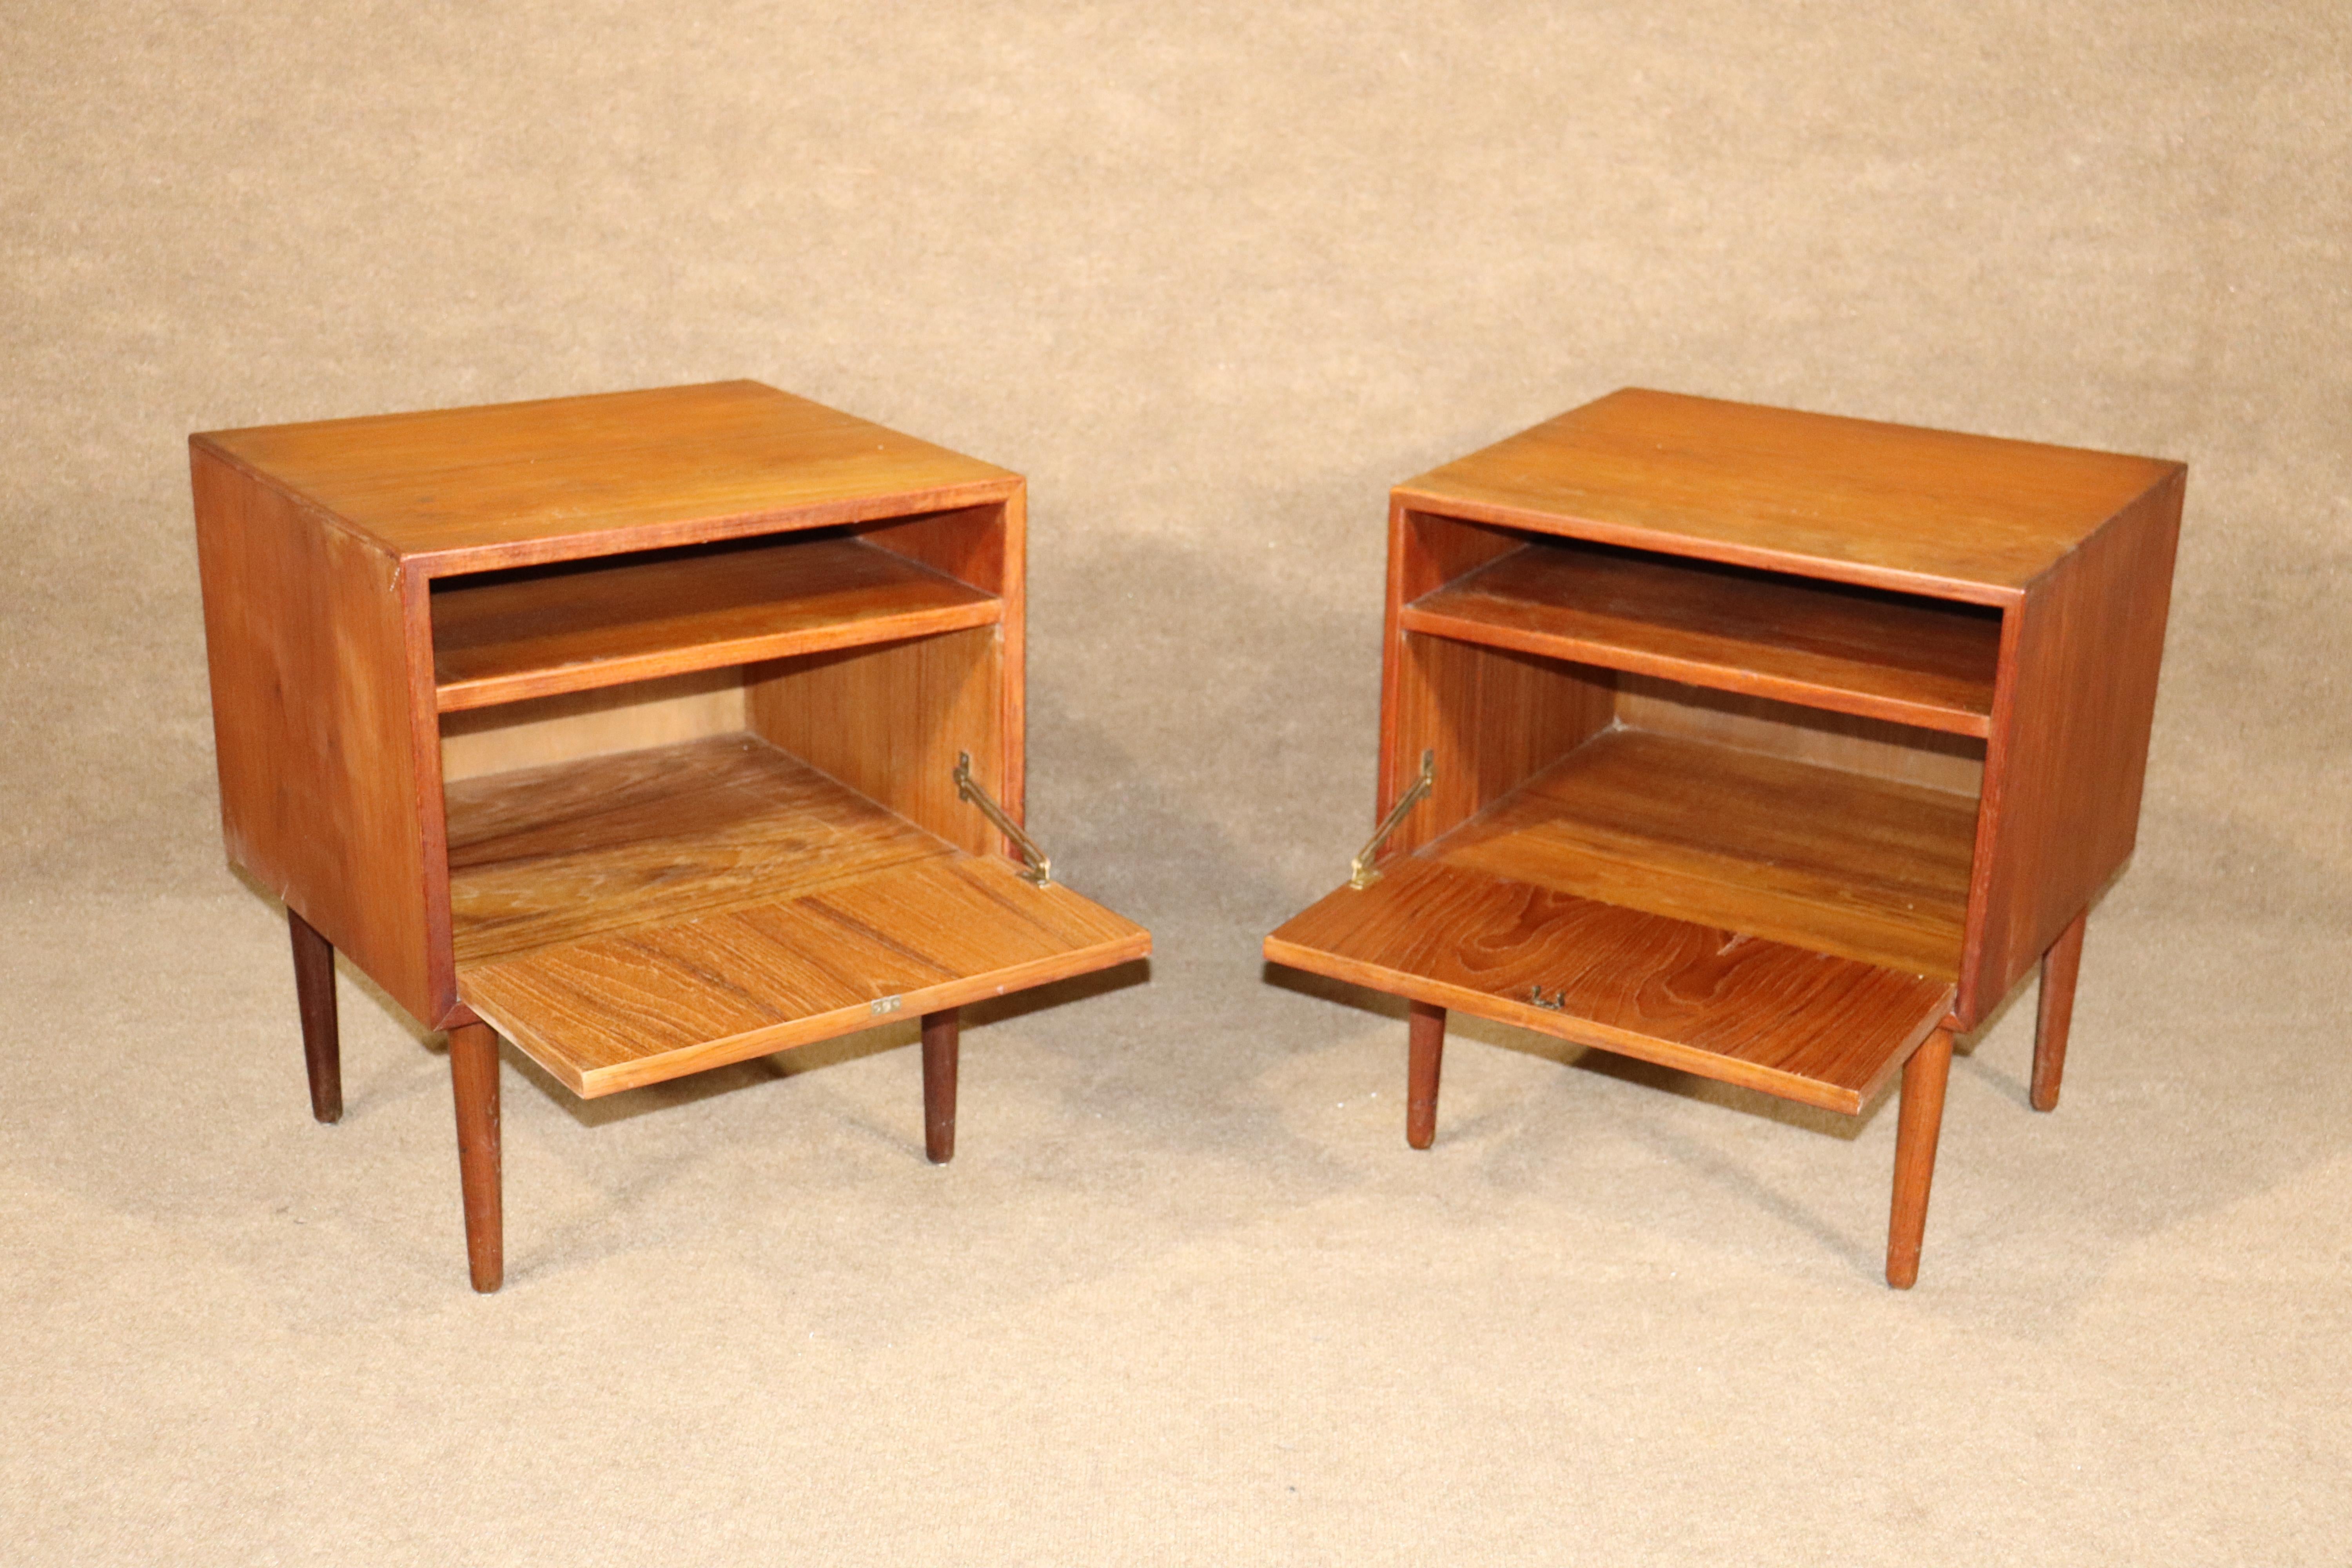 Pair of side tables by Falster with warm teak grain. Drop front cabinet storage and open storage above.
Please confirm location NY of NJ.